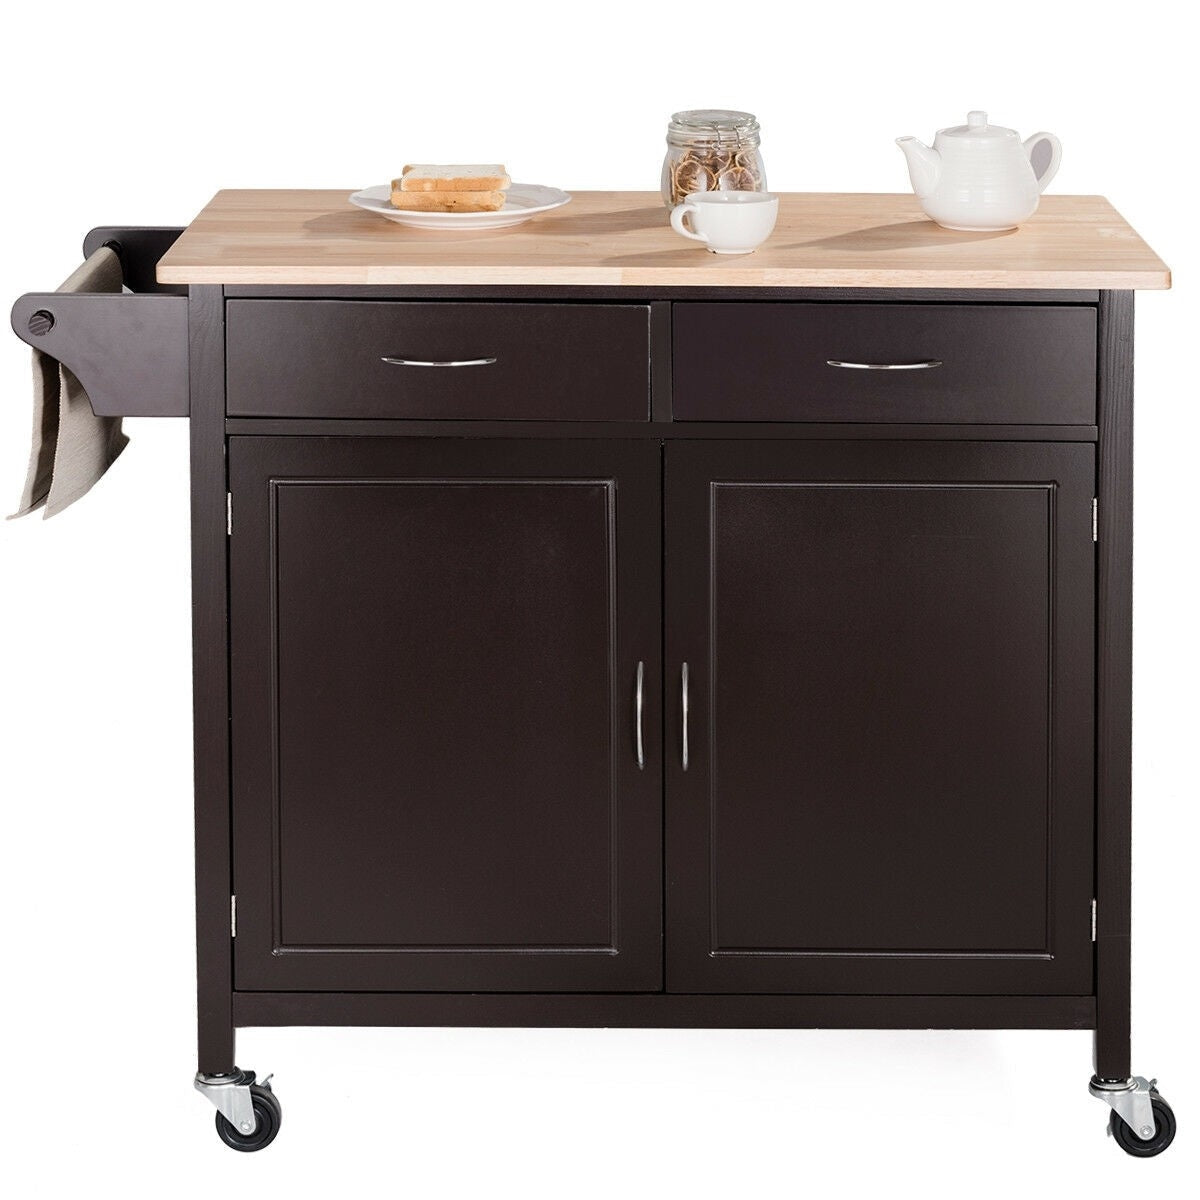 Kitchen > Kitchen Carts - Brown Kitchen Island Storage Cart With Wood Top And Casters